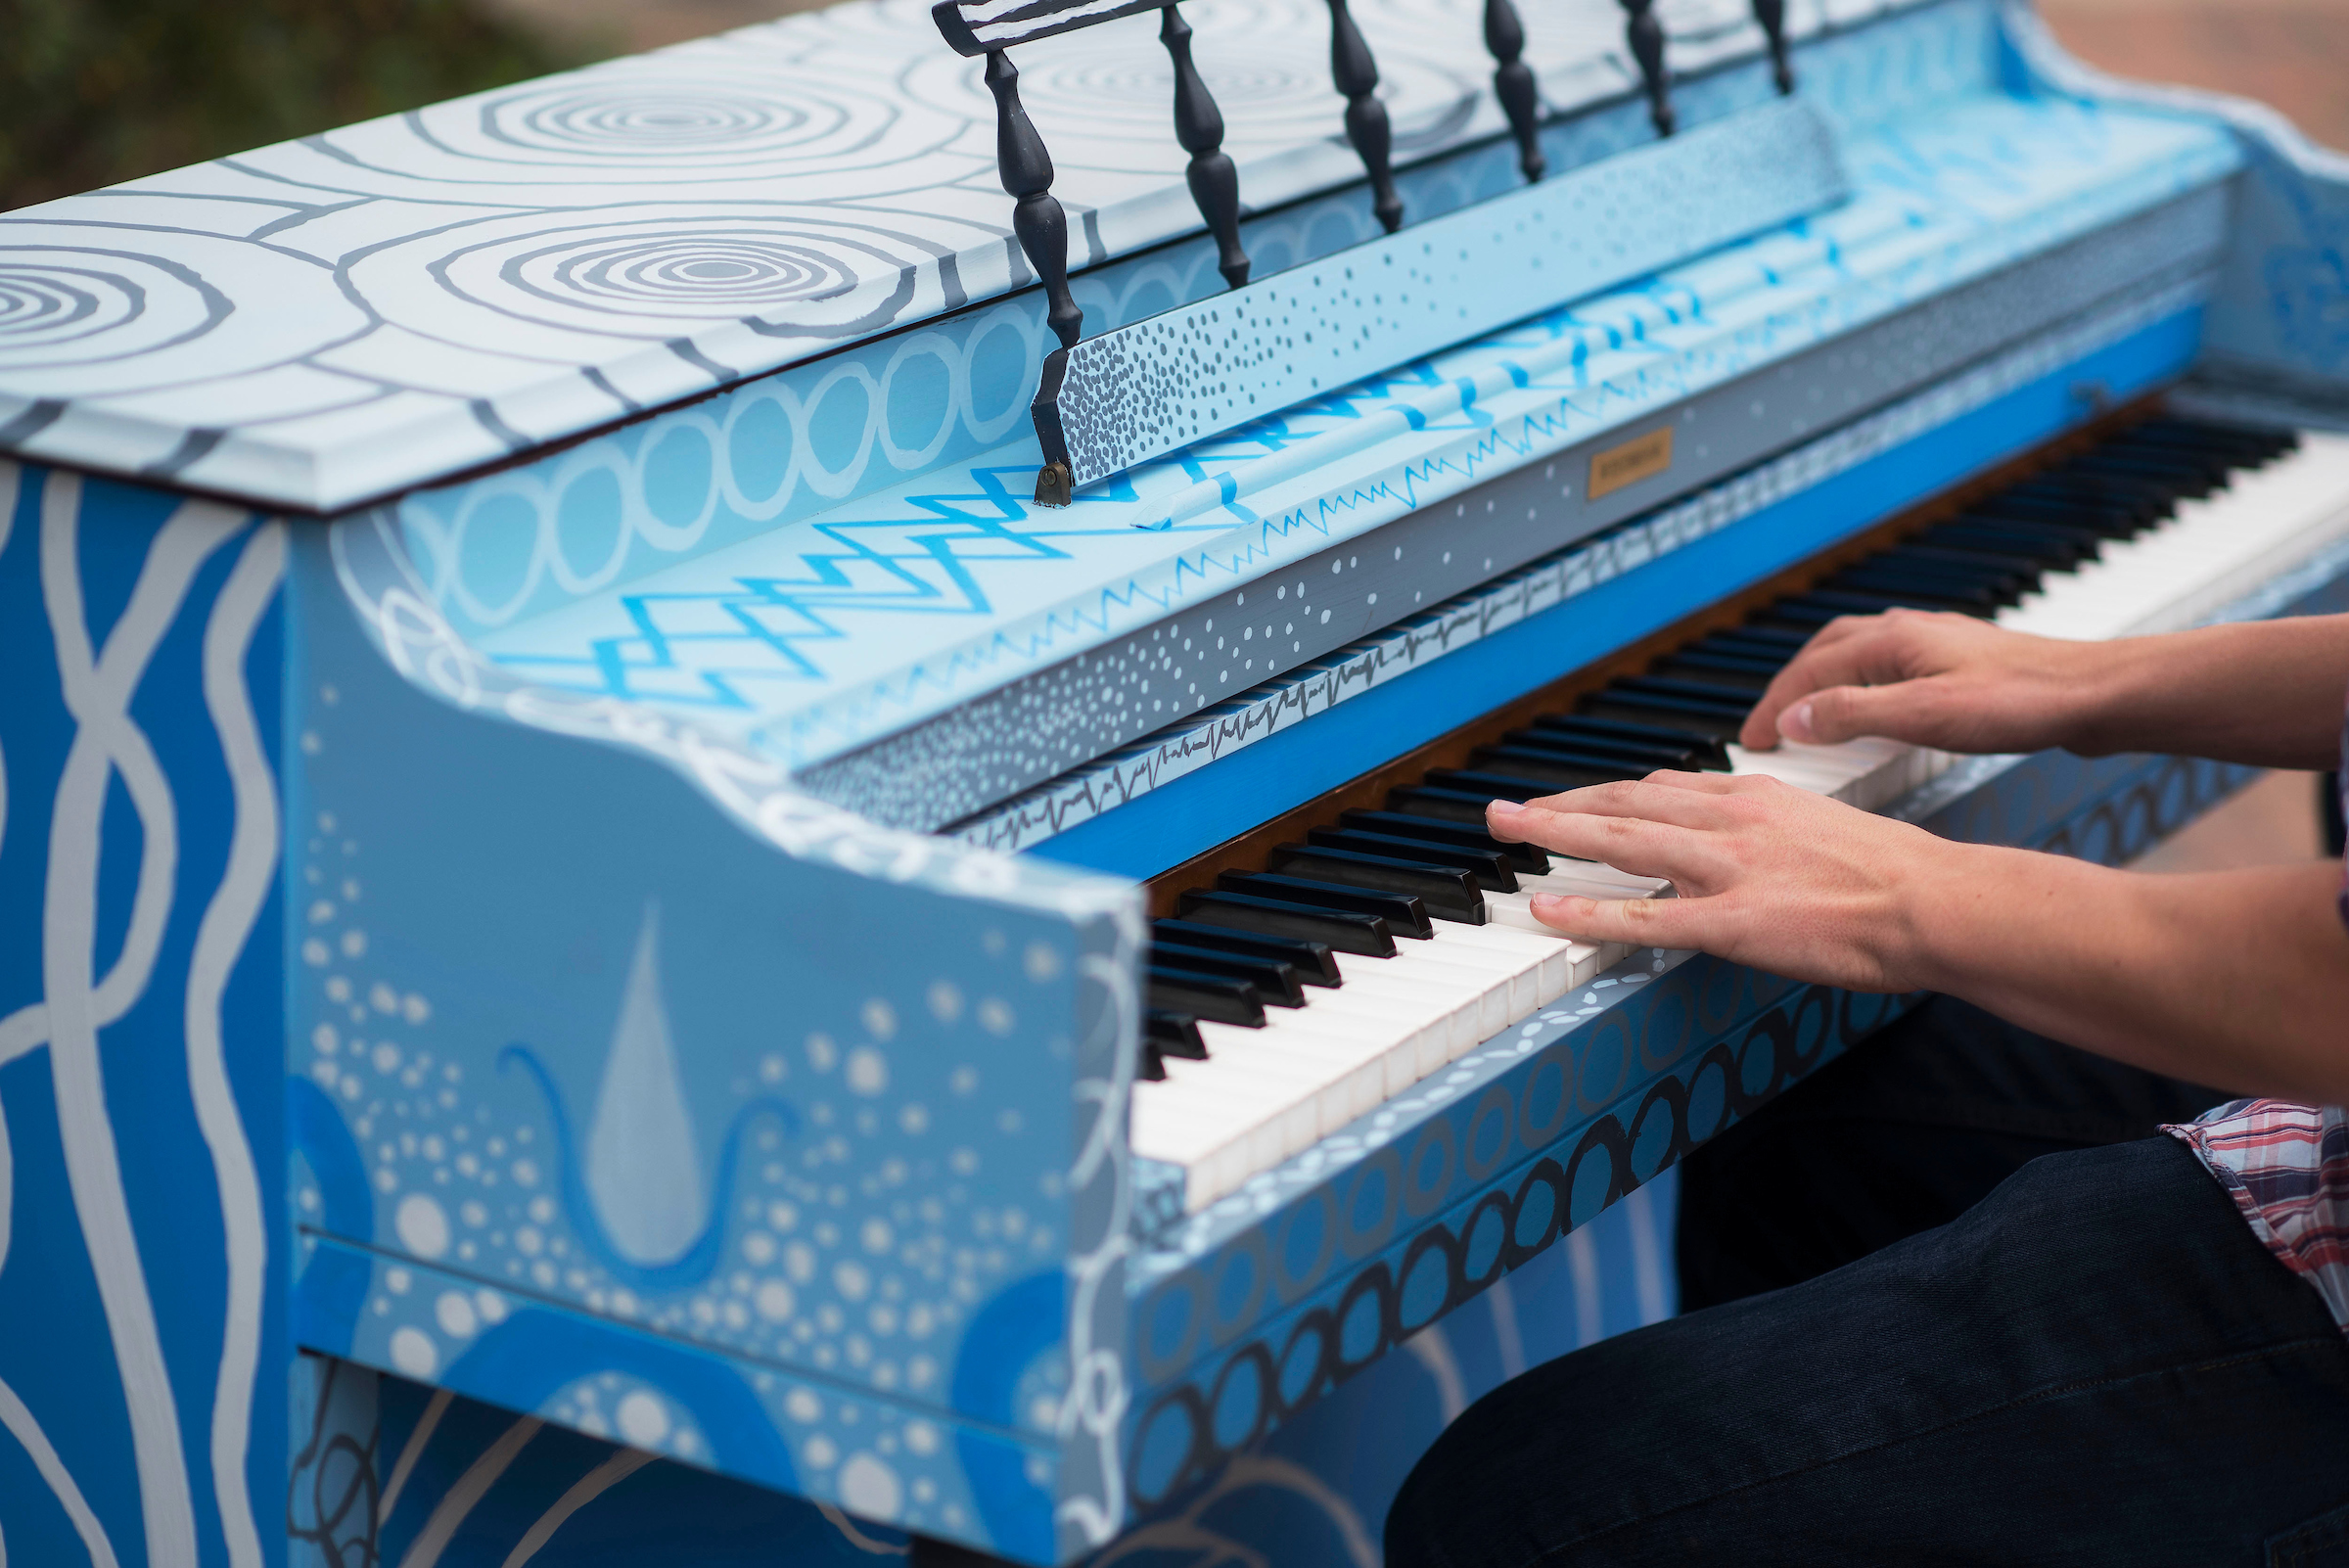 Ten colorful, painted pianos will be installed across campus for people to play. (photo by Jon Gardiner)